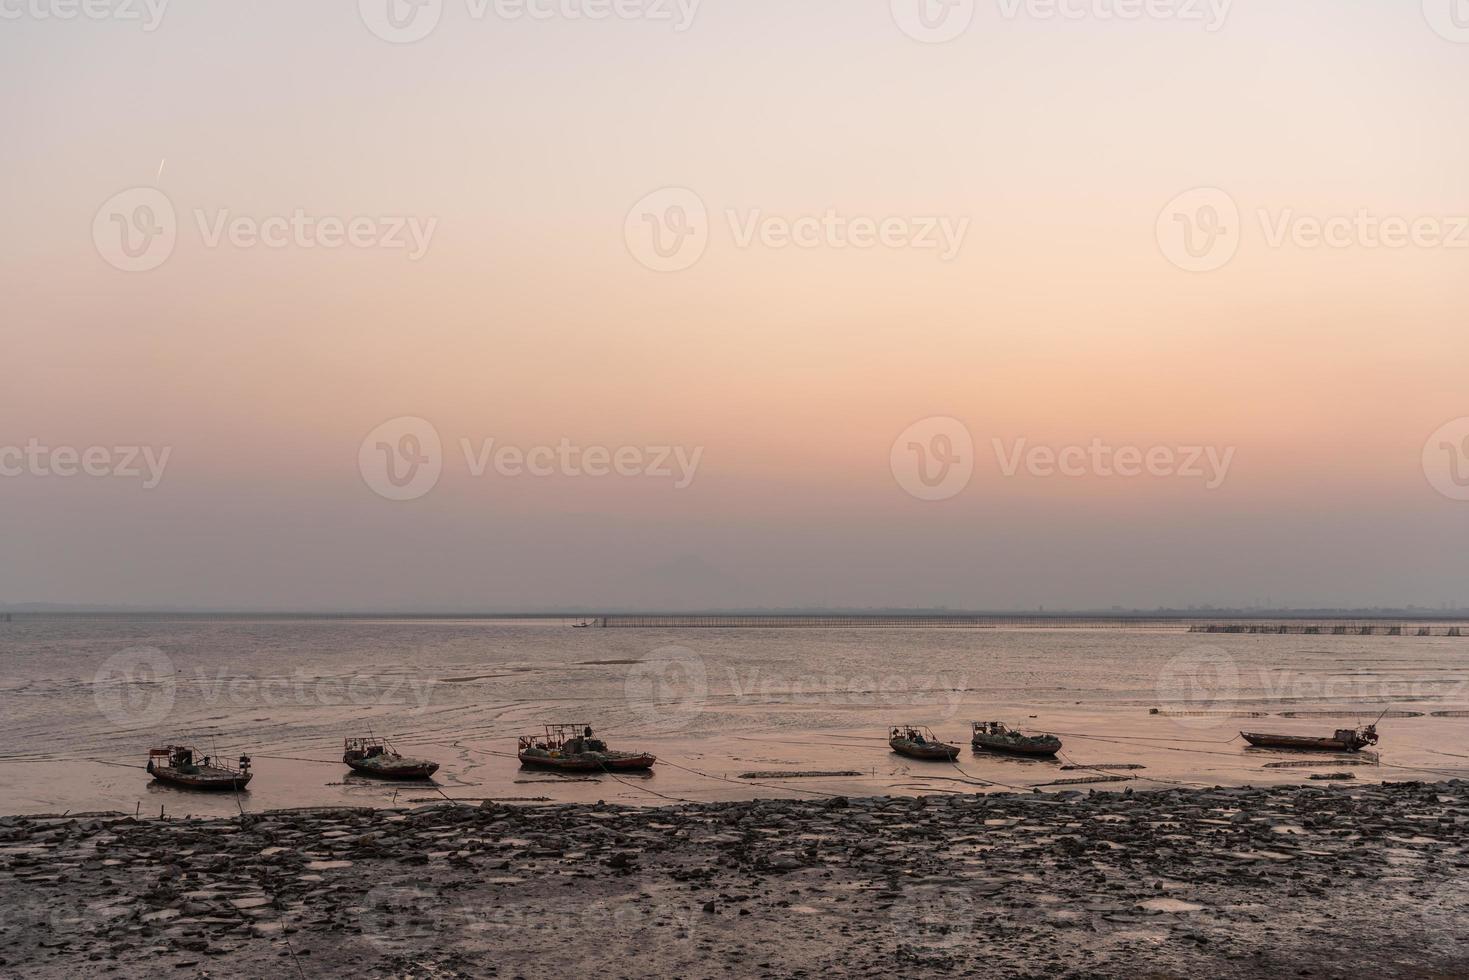 Golden beaches and fishing boats on the beach at dusk photo